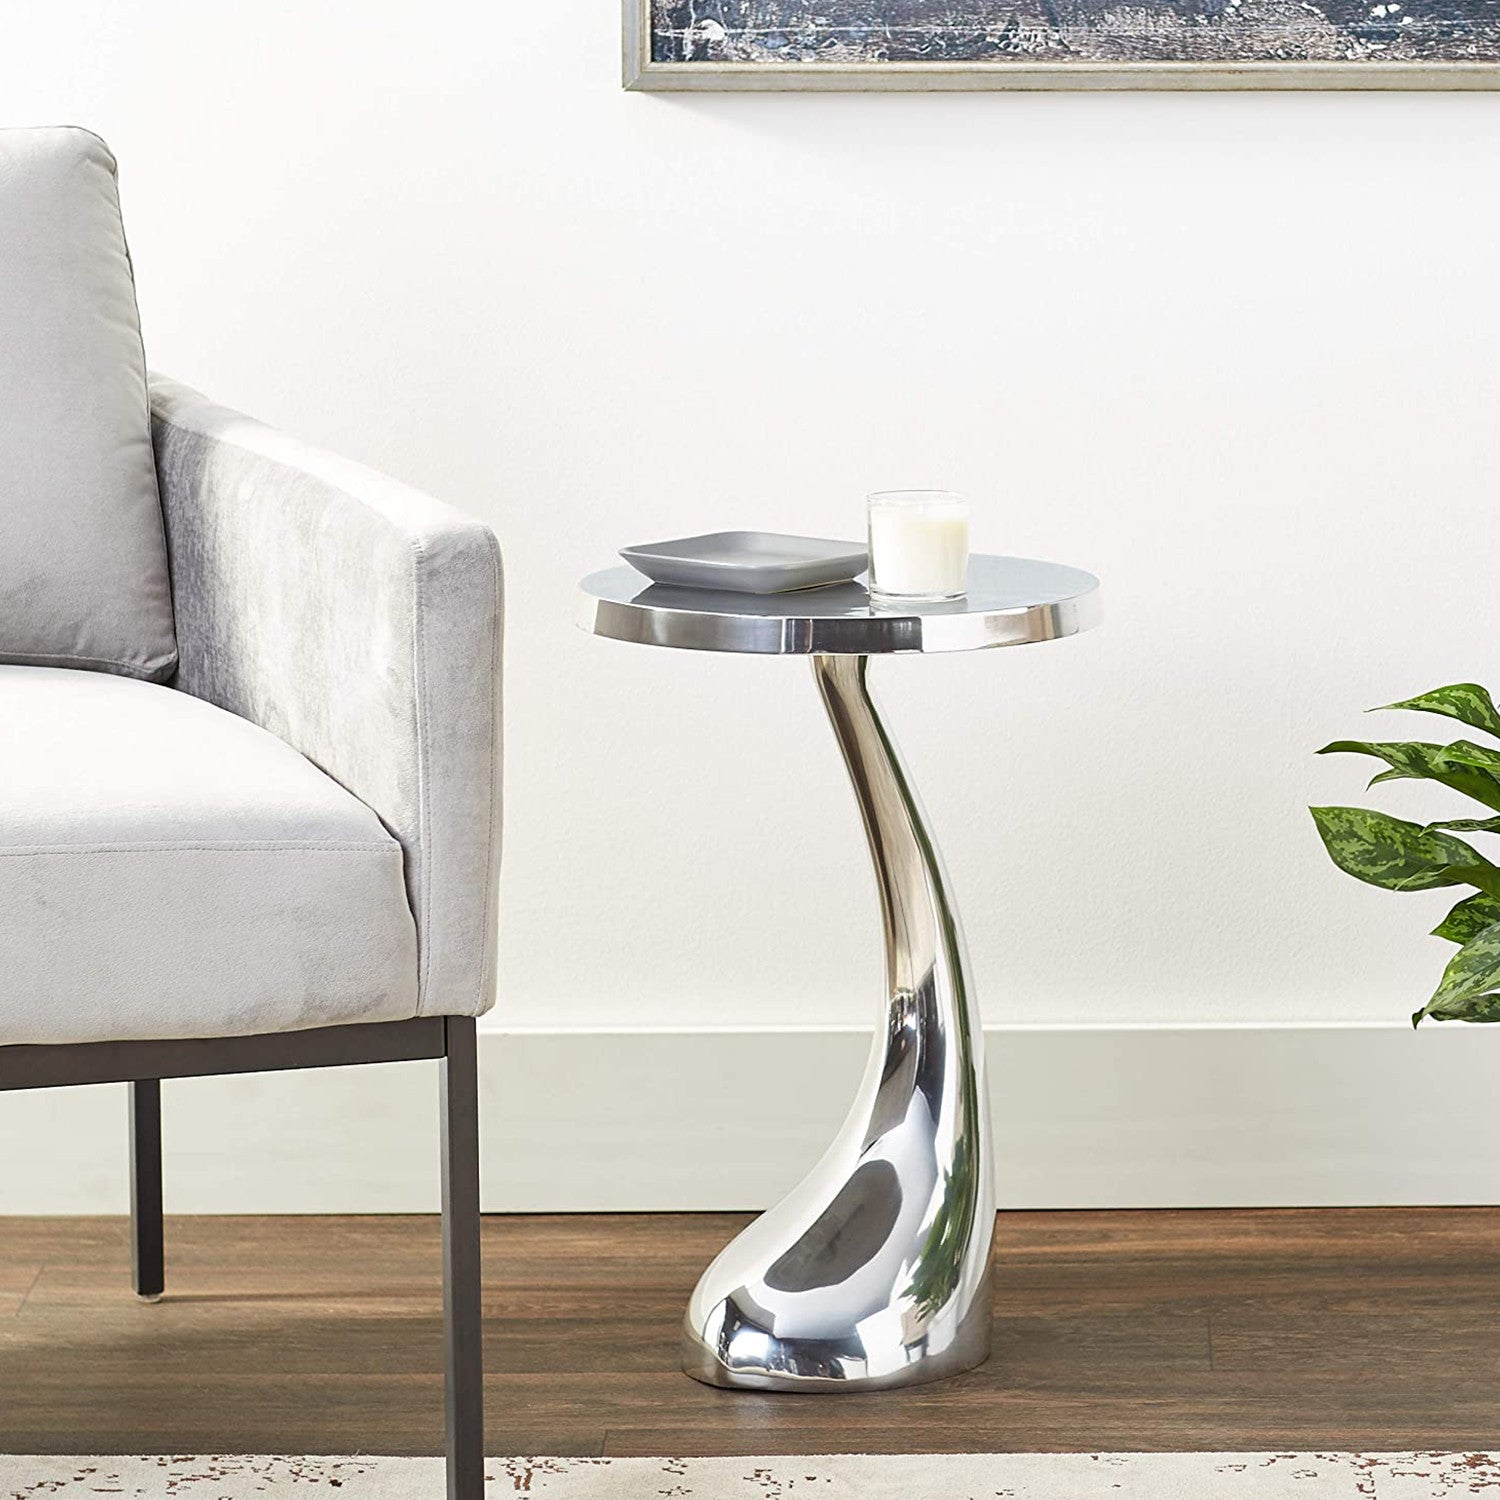 21" Silver Aluminum Round End Table